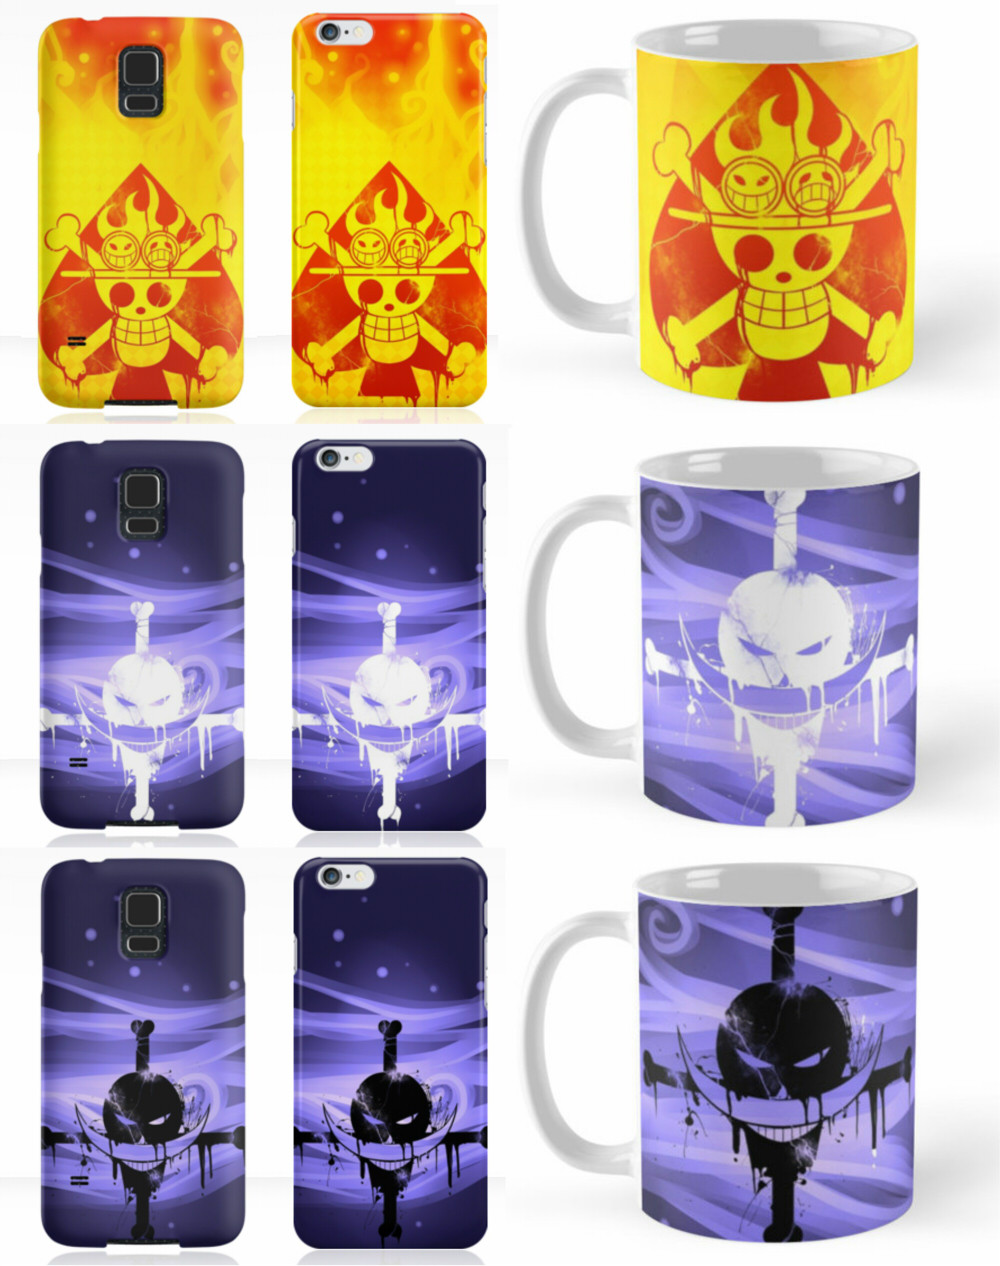 mah-blackberreh:I have a bunch of new merch designs guys! Samsung galaxy cases, iphone